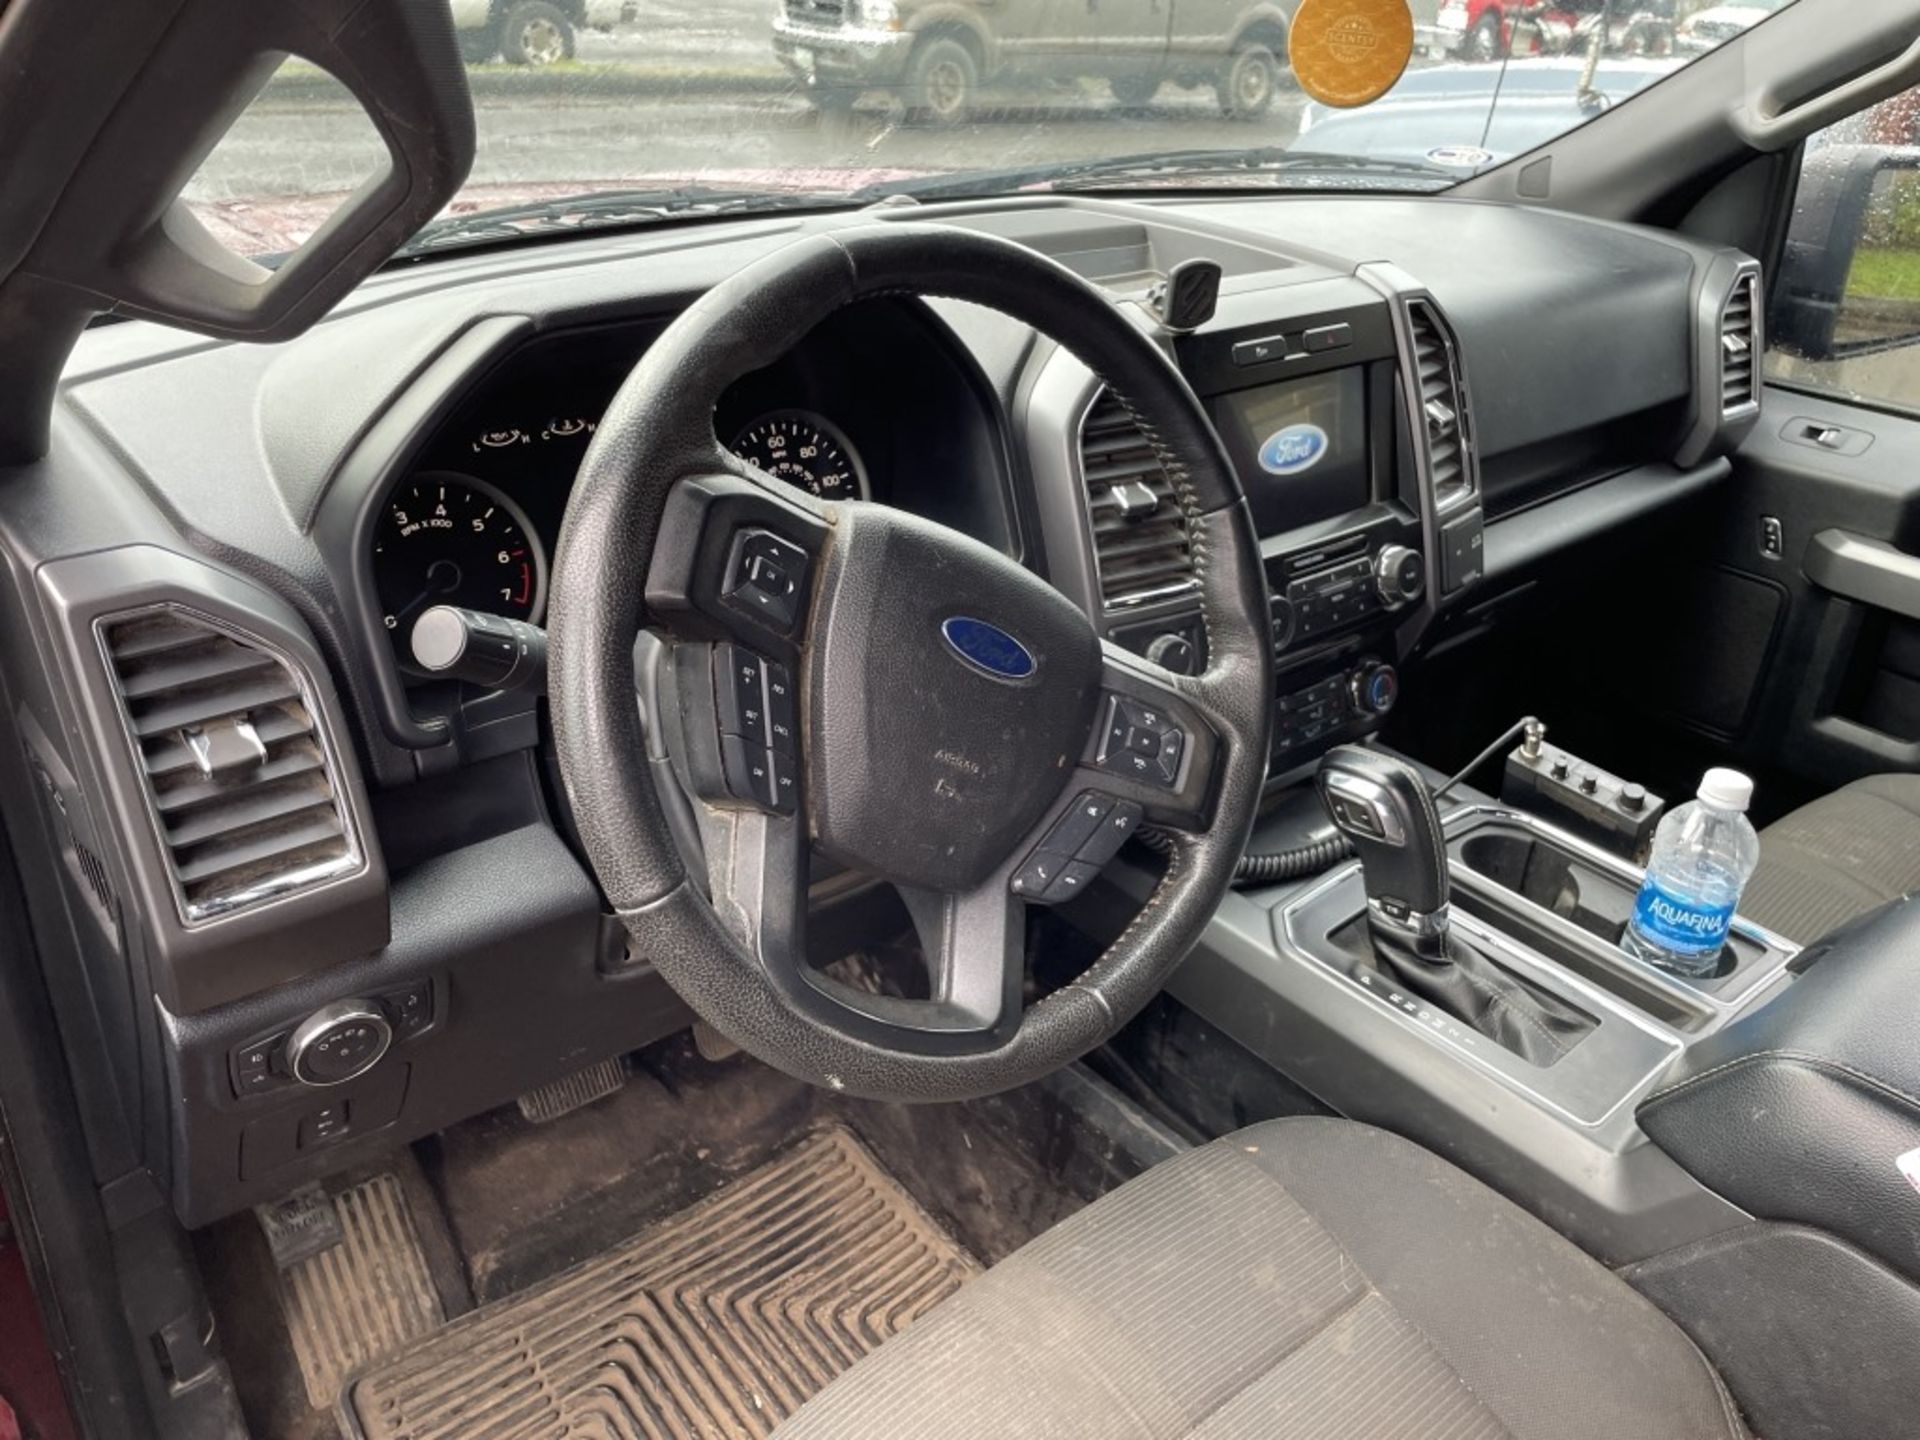 2016 Ford F150 XLT 4x4 Extra Cab Pickup - Image 7 of 14